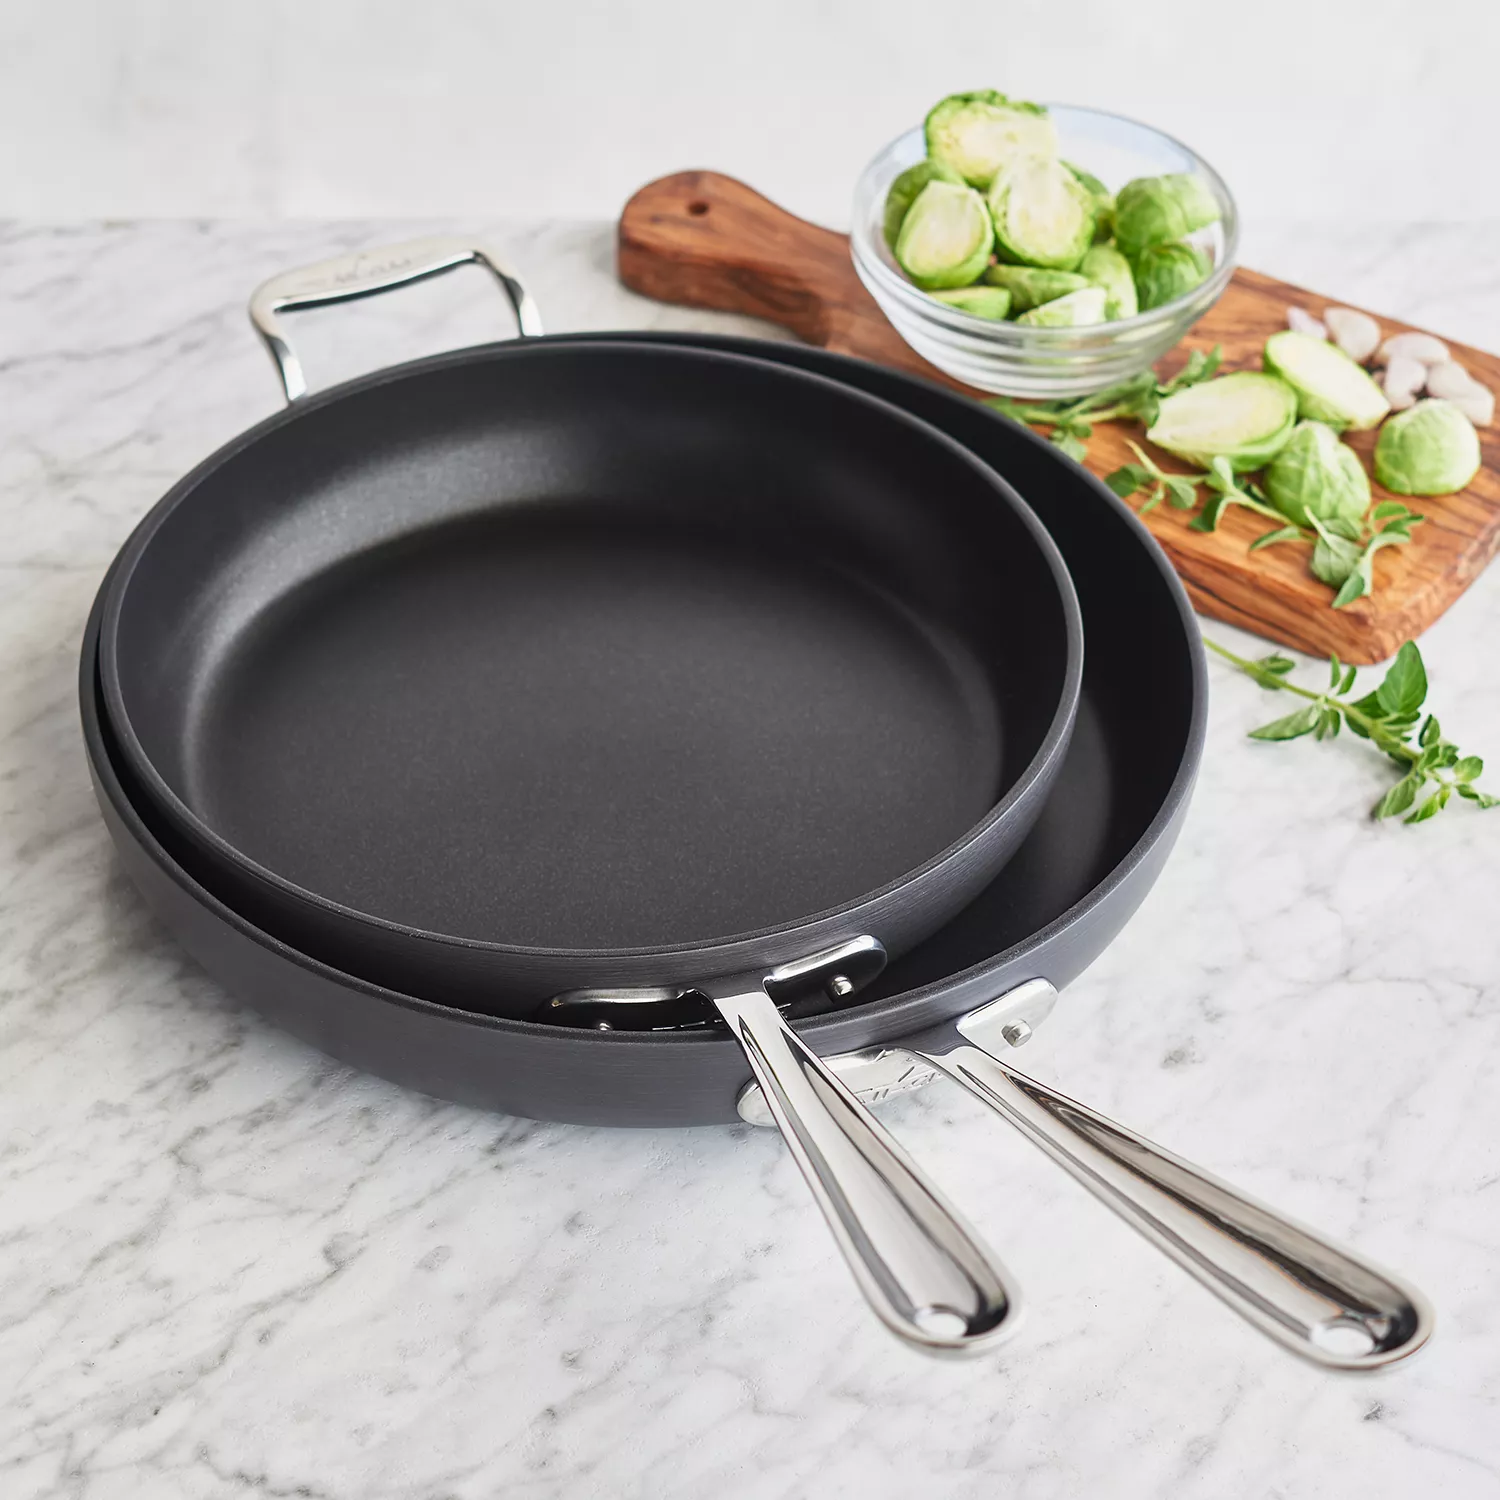 The All-Clad HA1 Nonstick Skillet Set Is 53% Off at